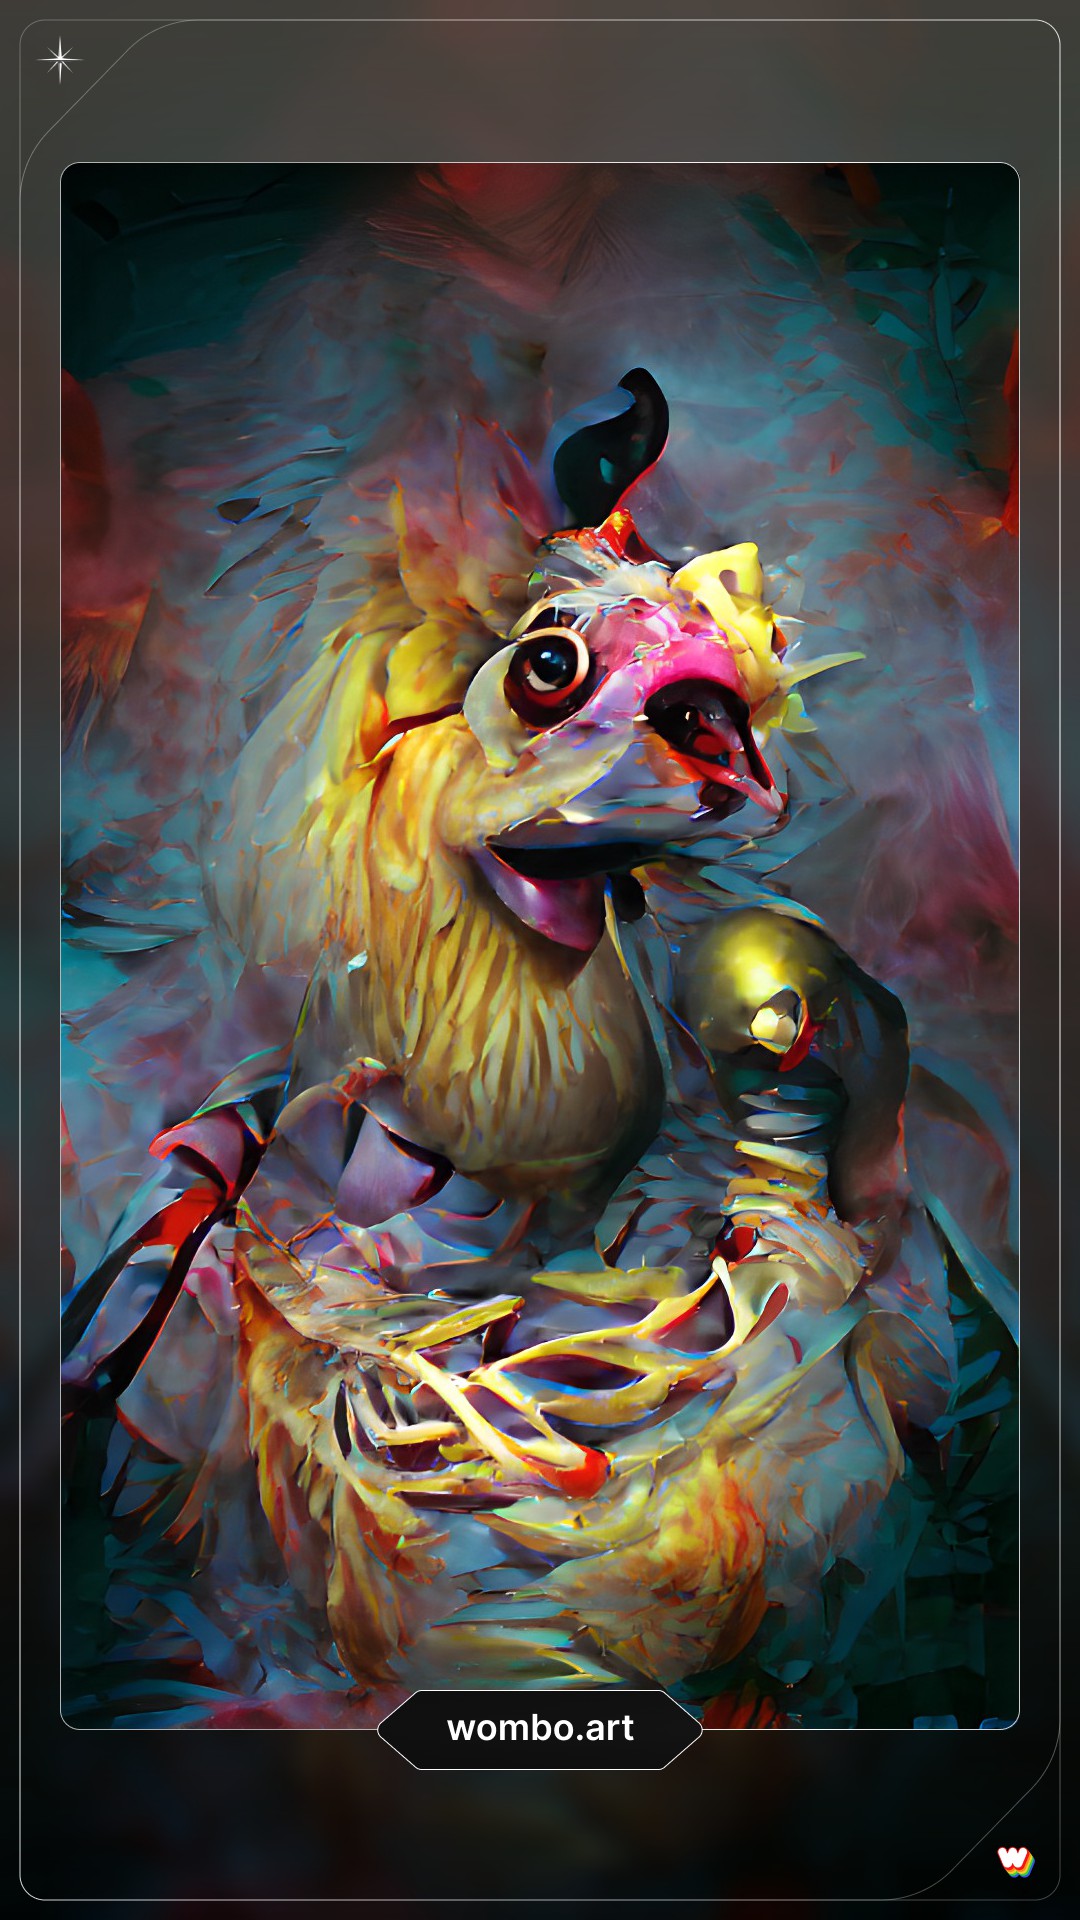 Withered fnaf plus chica by TimetoGetCreative0 on DeviantArt